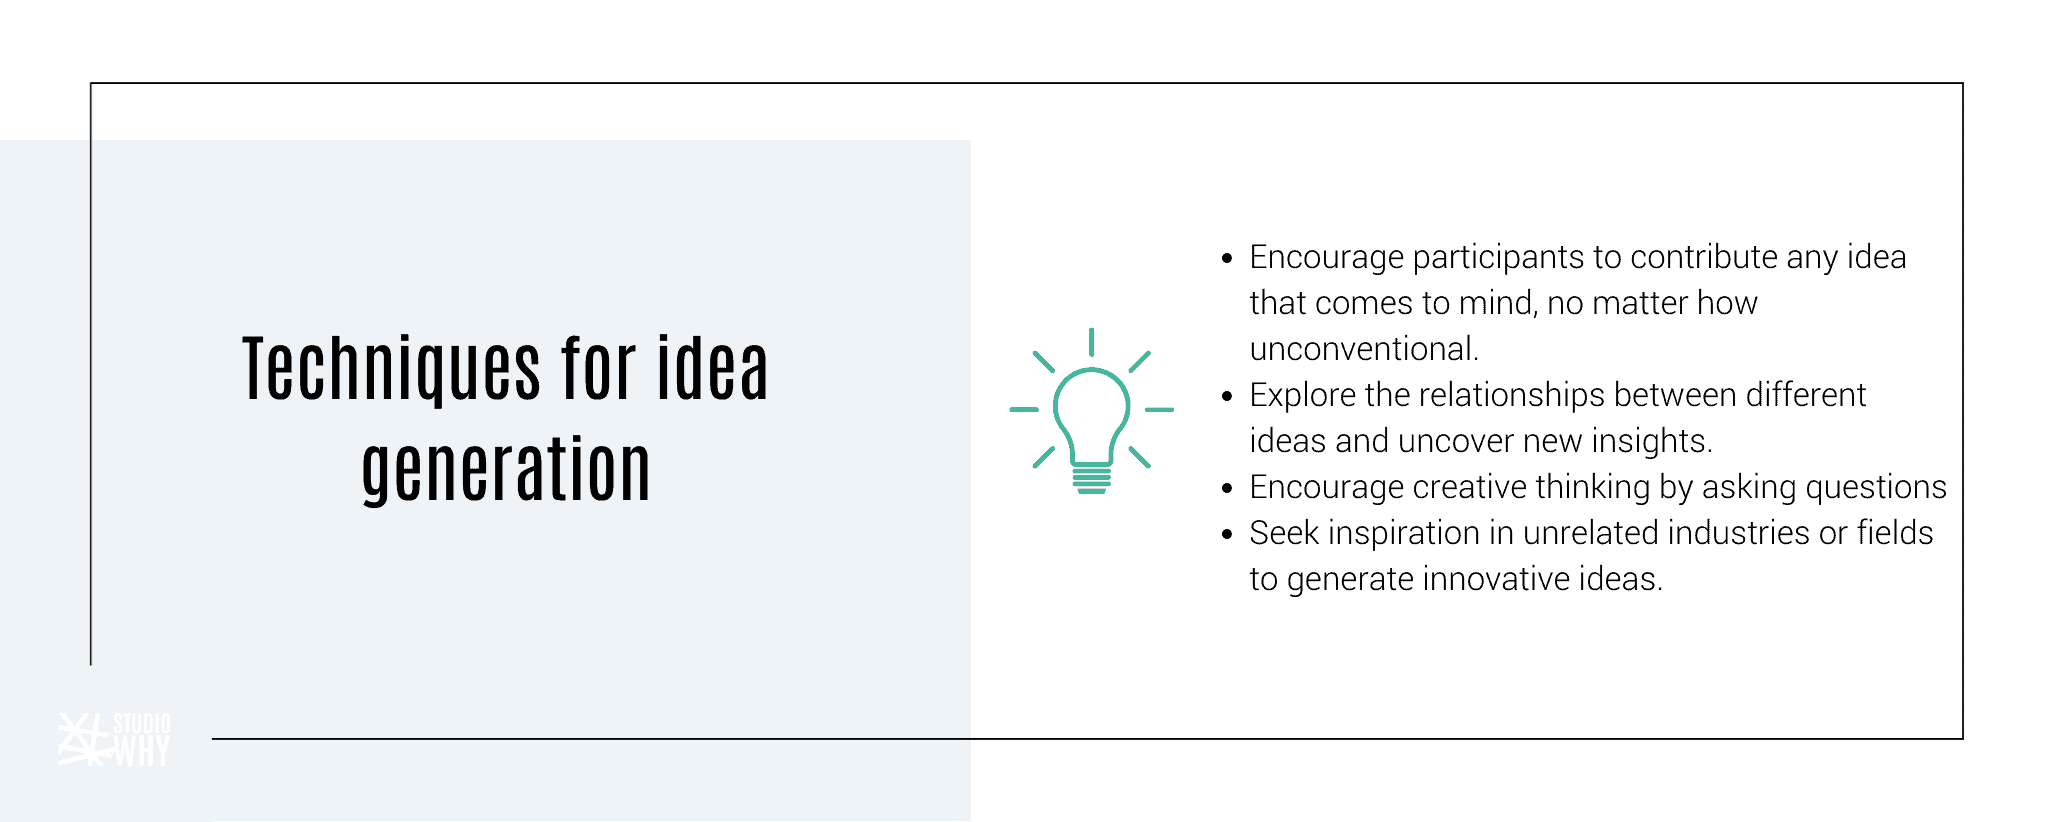 7 idea generation methods for out-of-the-box thinking